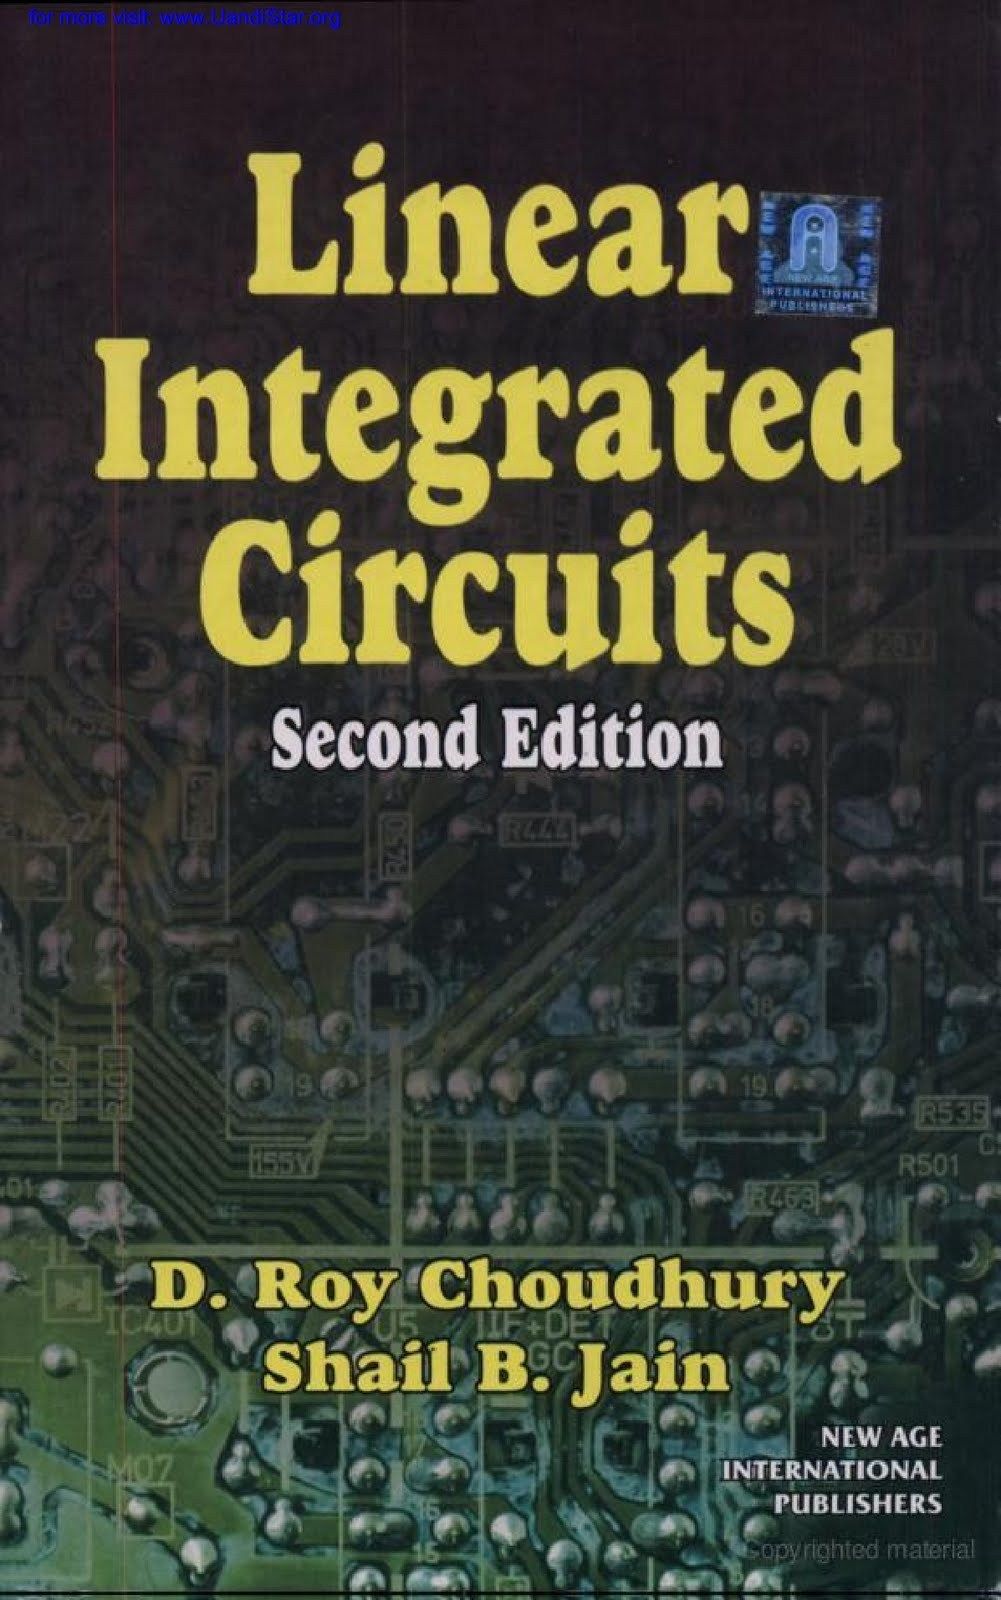 D roy choudhary linear integrated circuit pdf converter